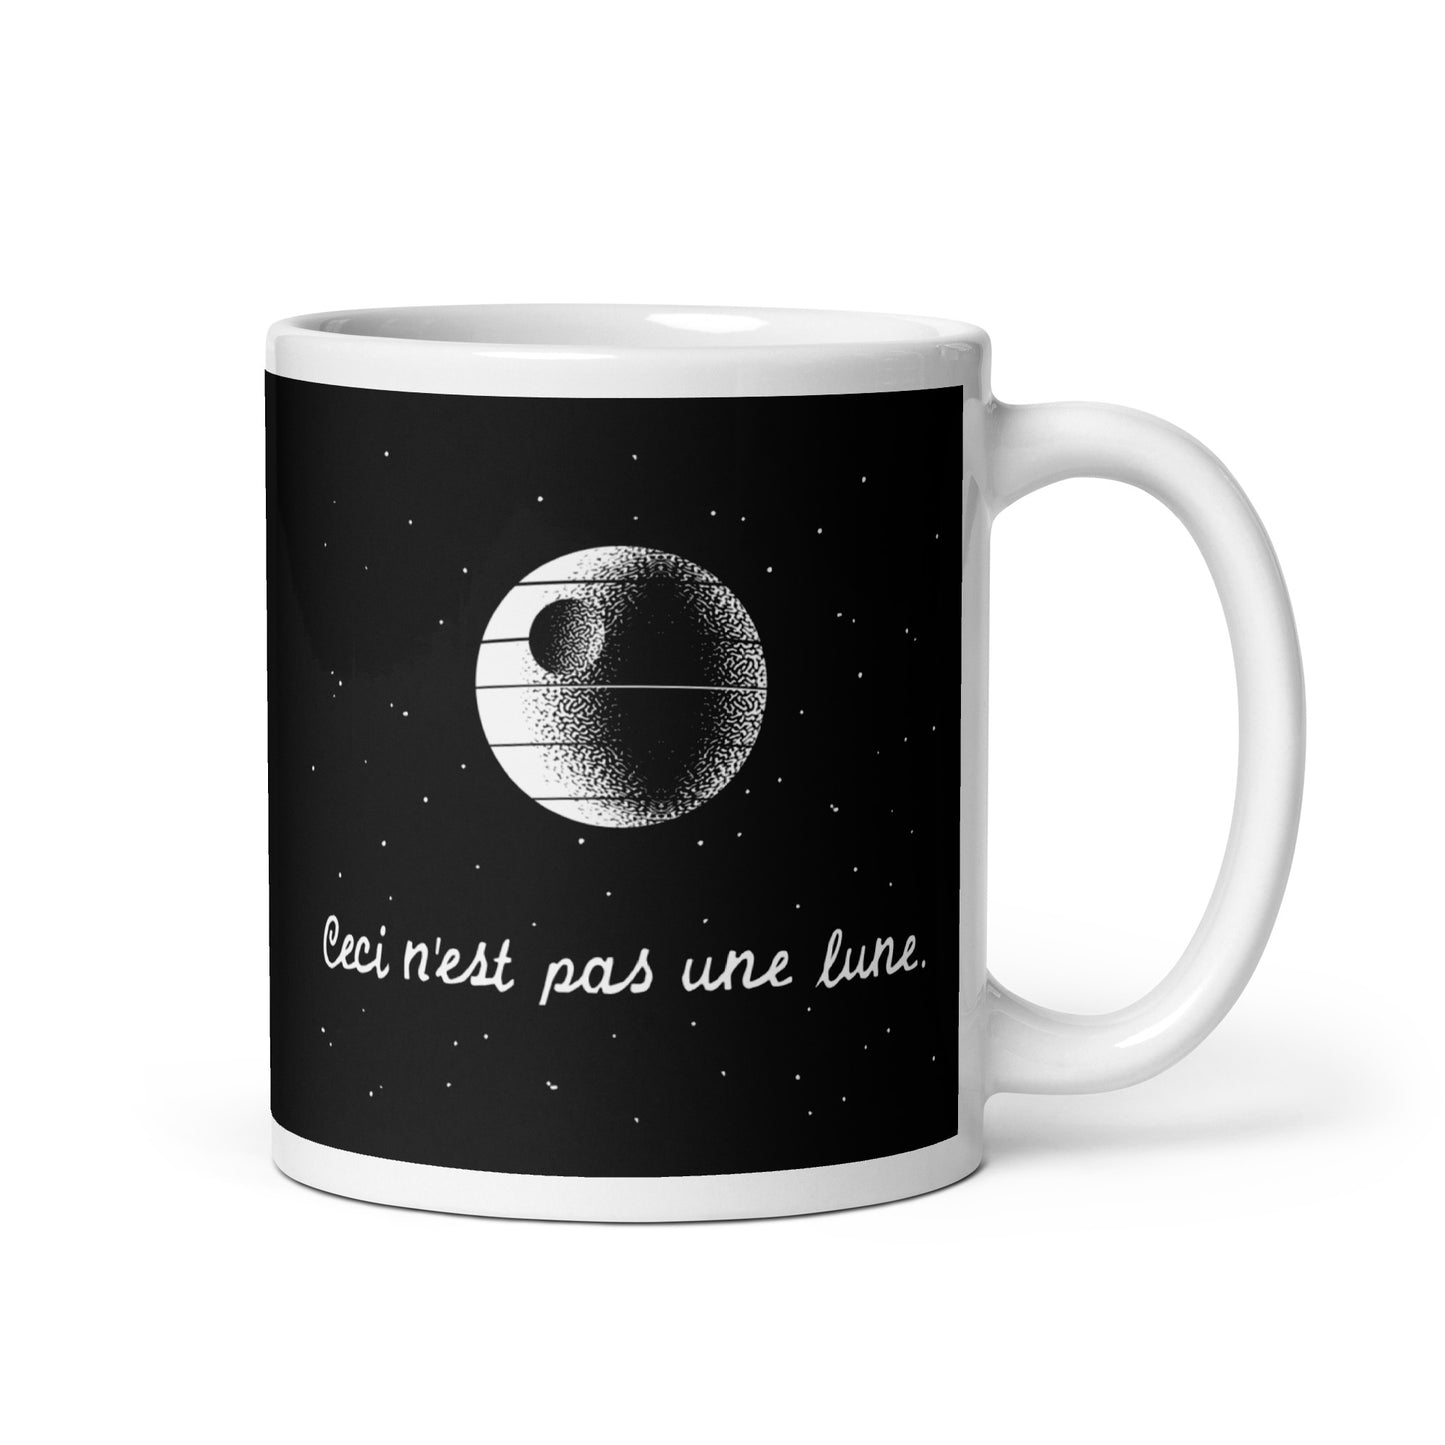 This Is Not A Moon Mug